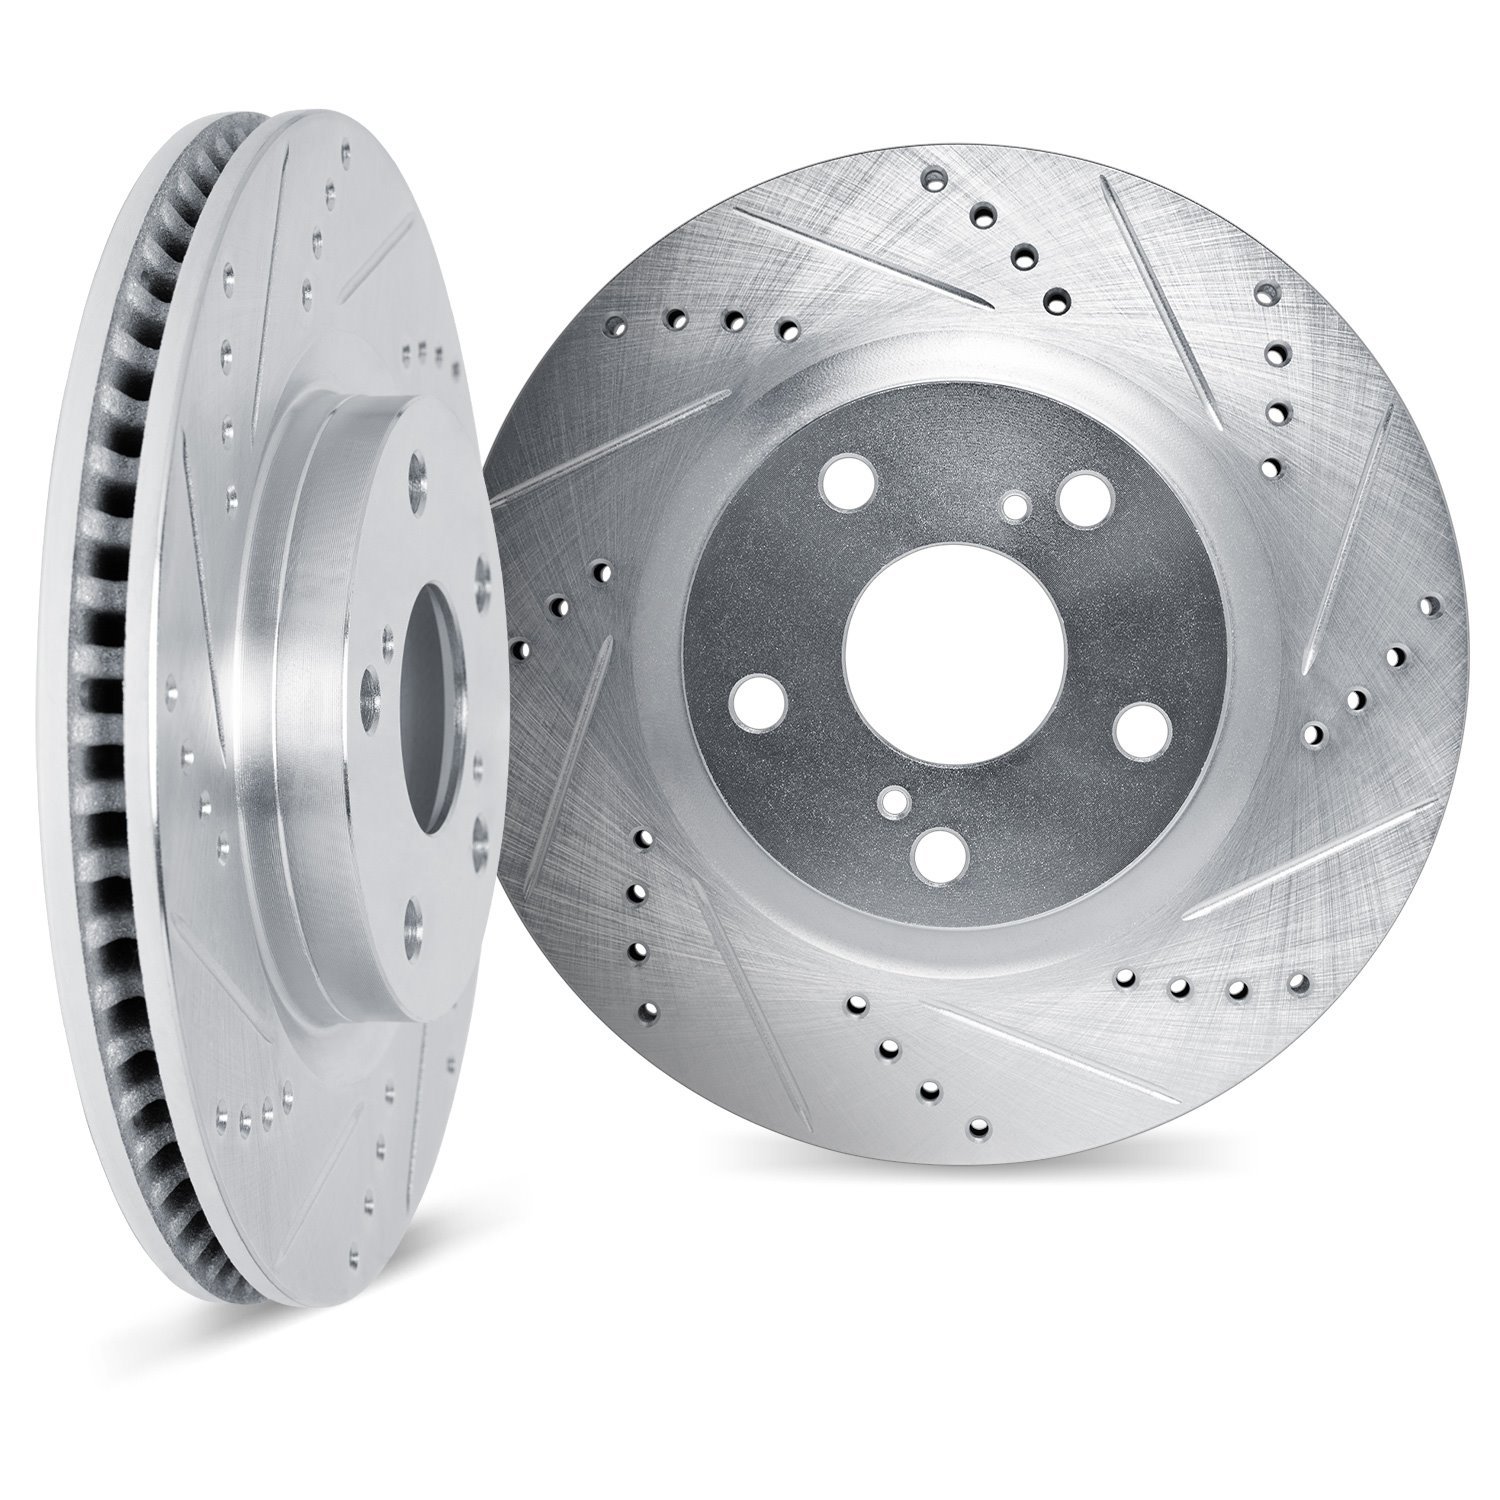 7002-54212 Drilled/Slotted Brake Rotors [Silver], Fits Select Ford/Lincoln/Mercury/Mazda, Position: Rear